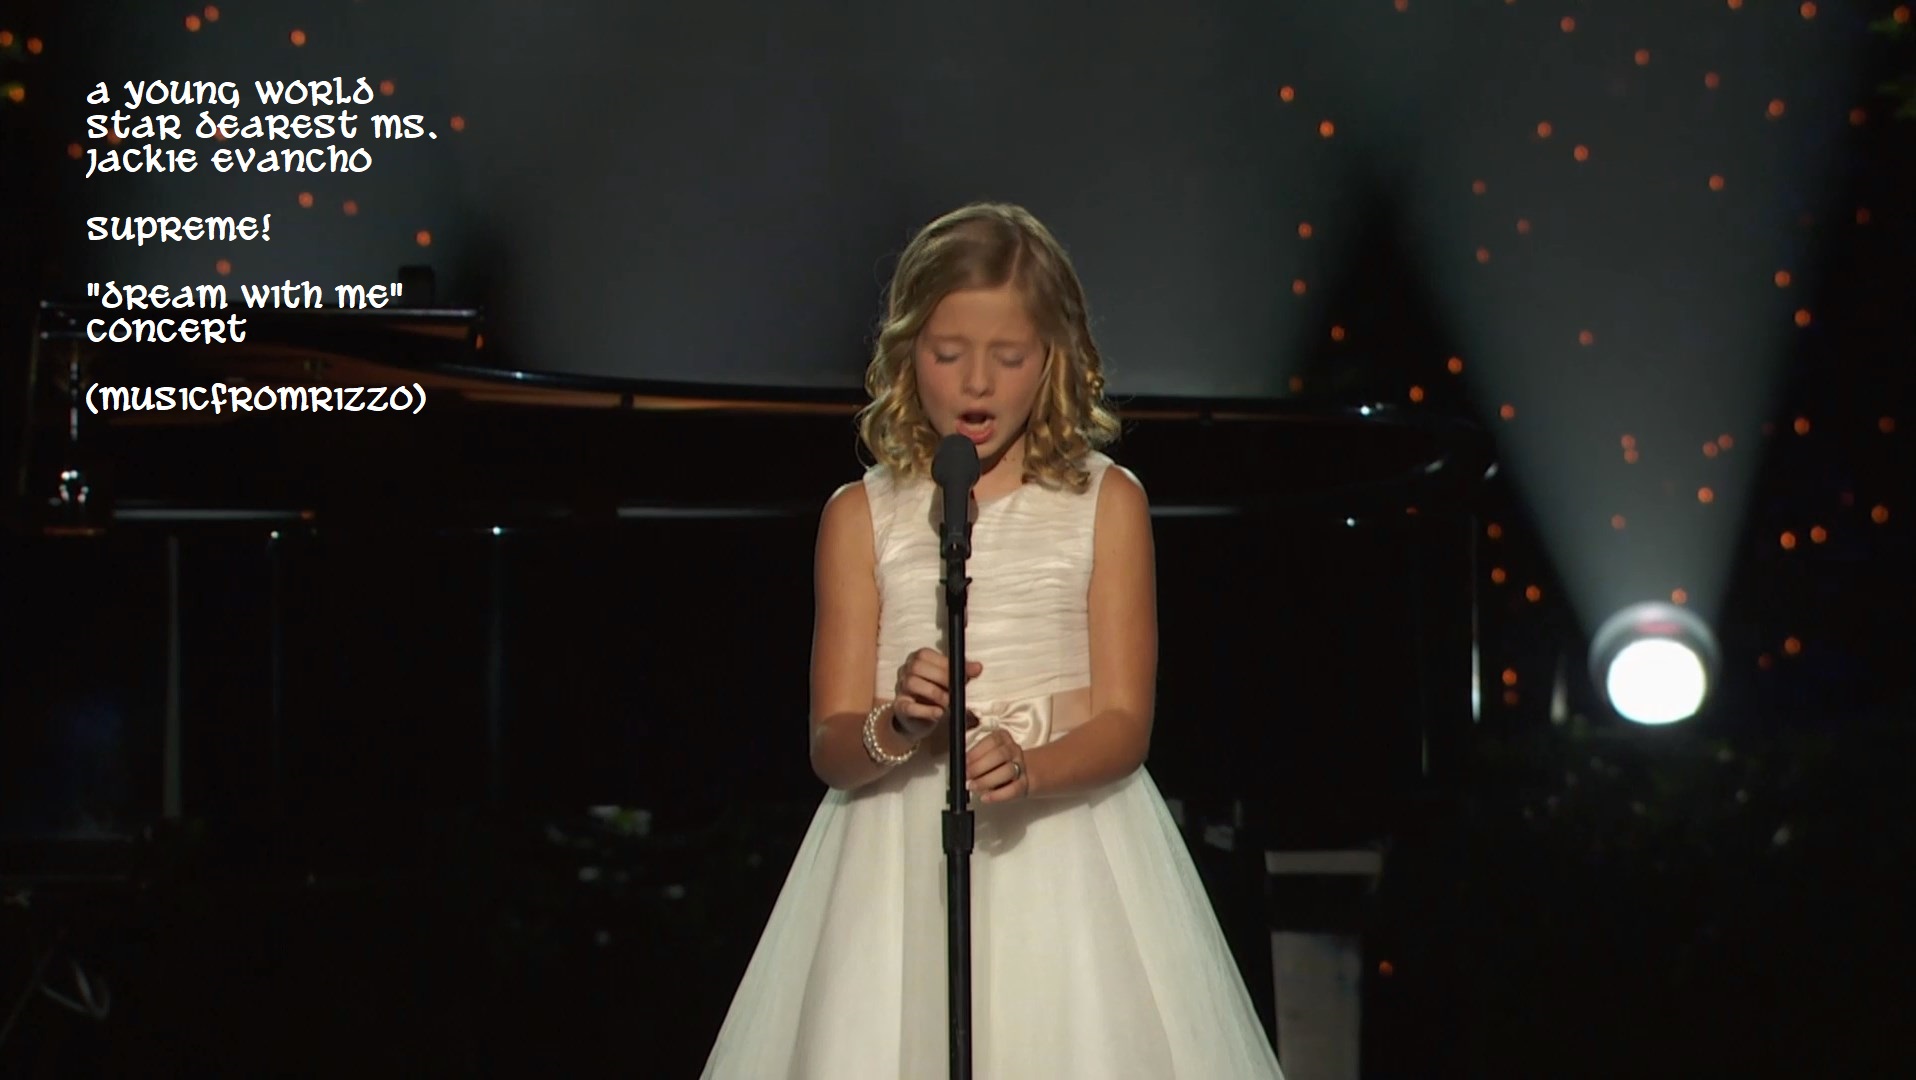 Jackie Evancho Music Of The Movies 1080p Download Torrents